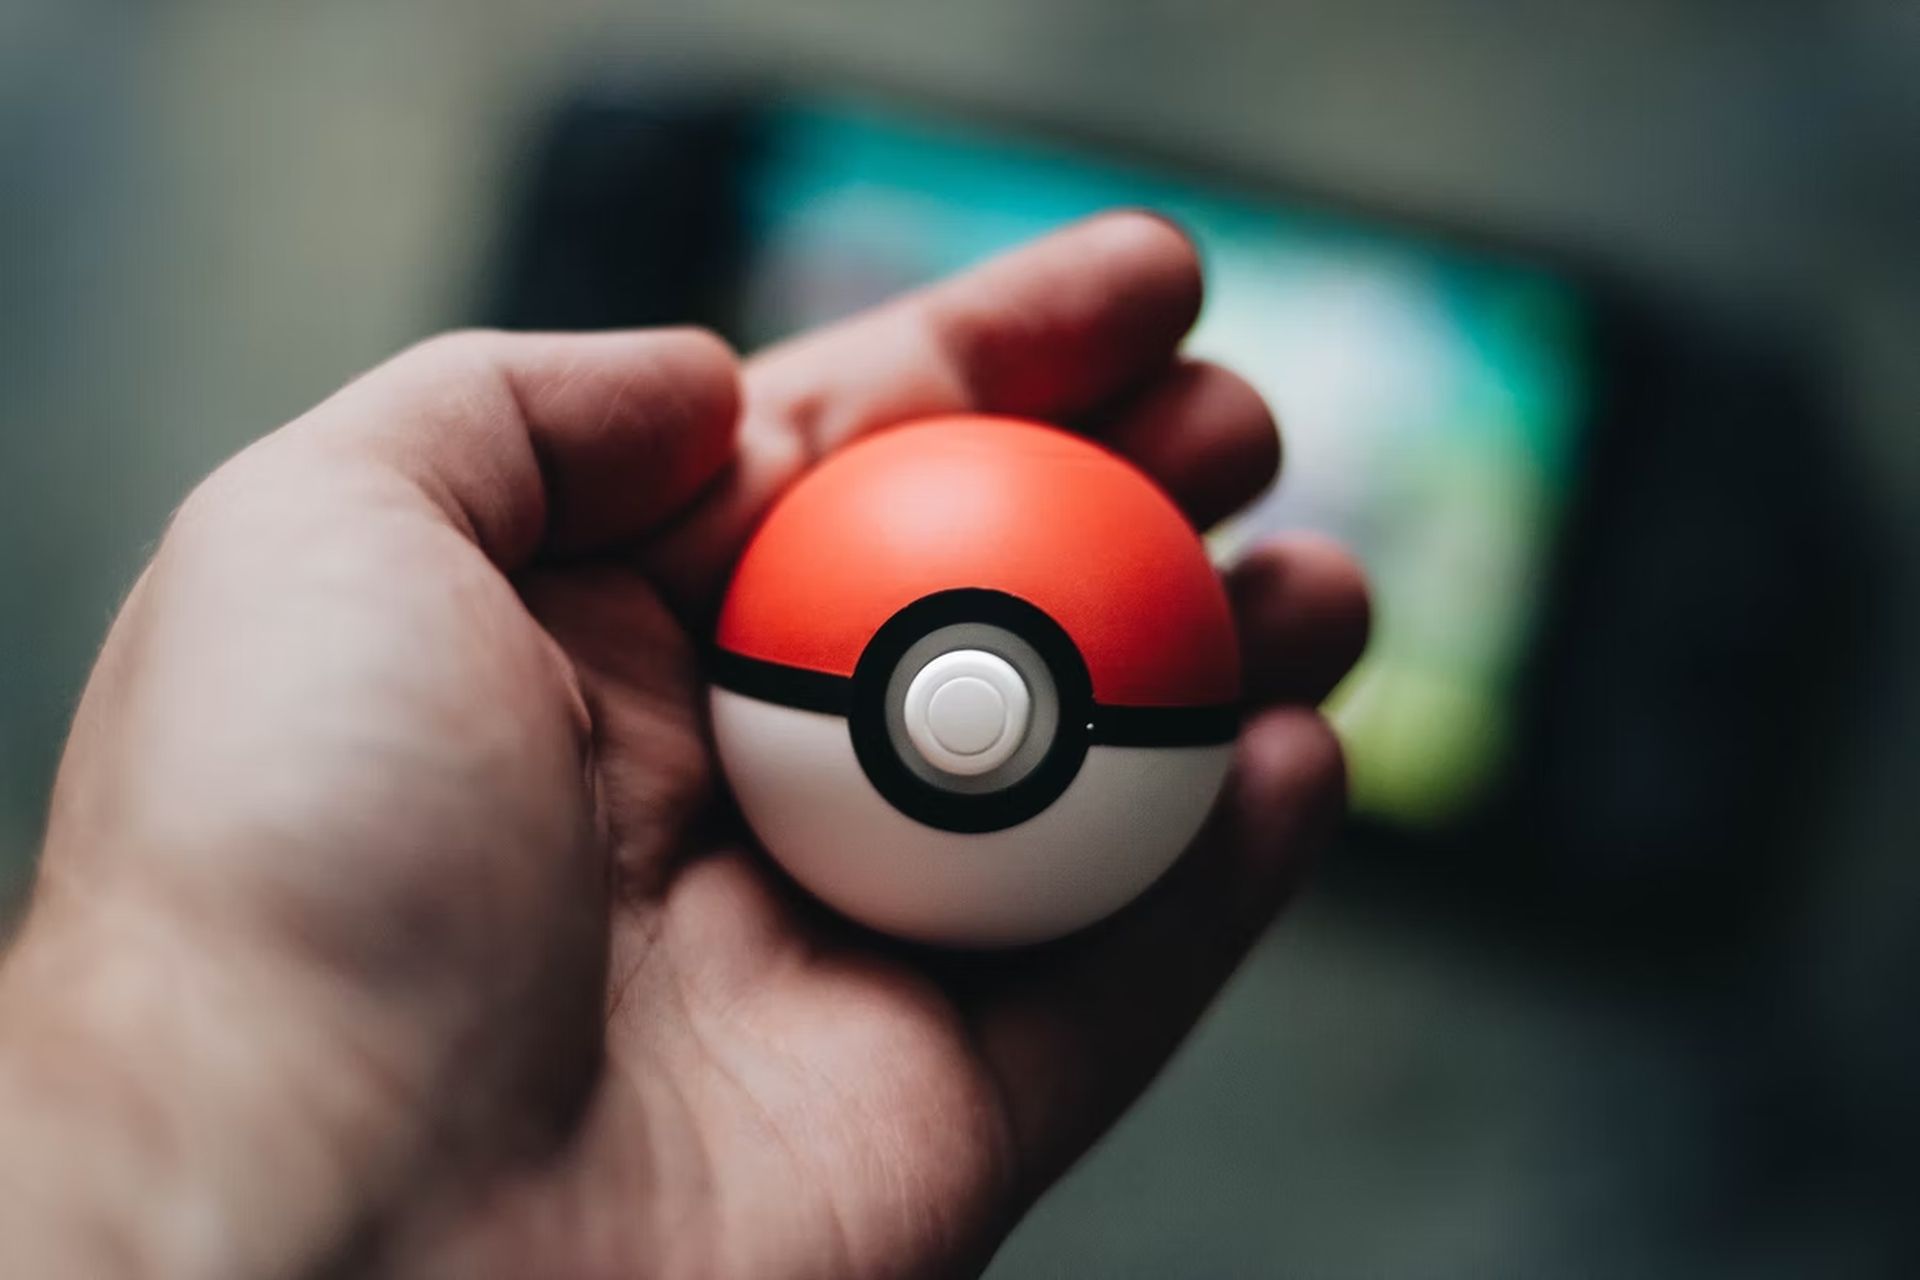 How is a game like Pokemon Go an example of augmented reality?